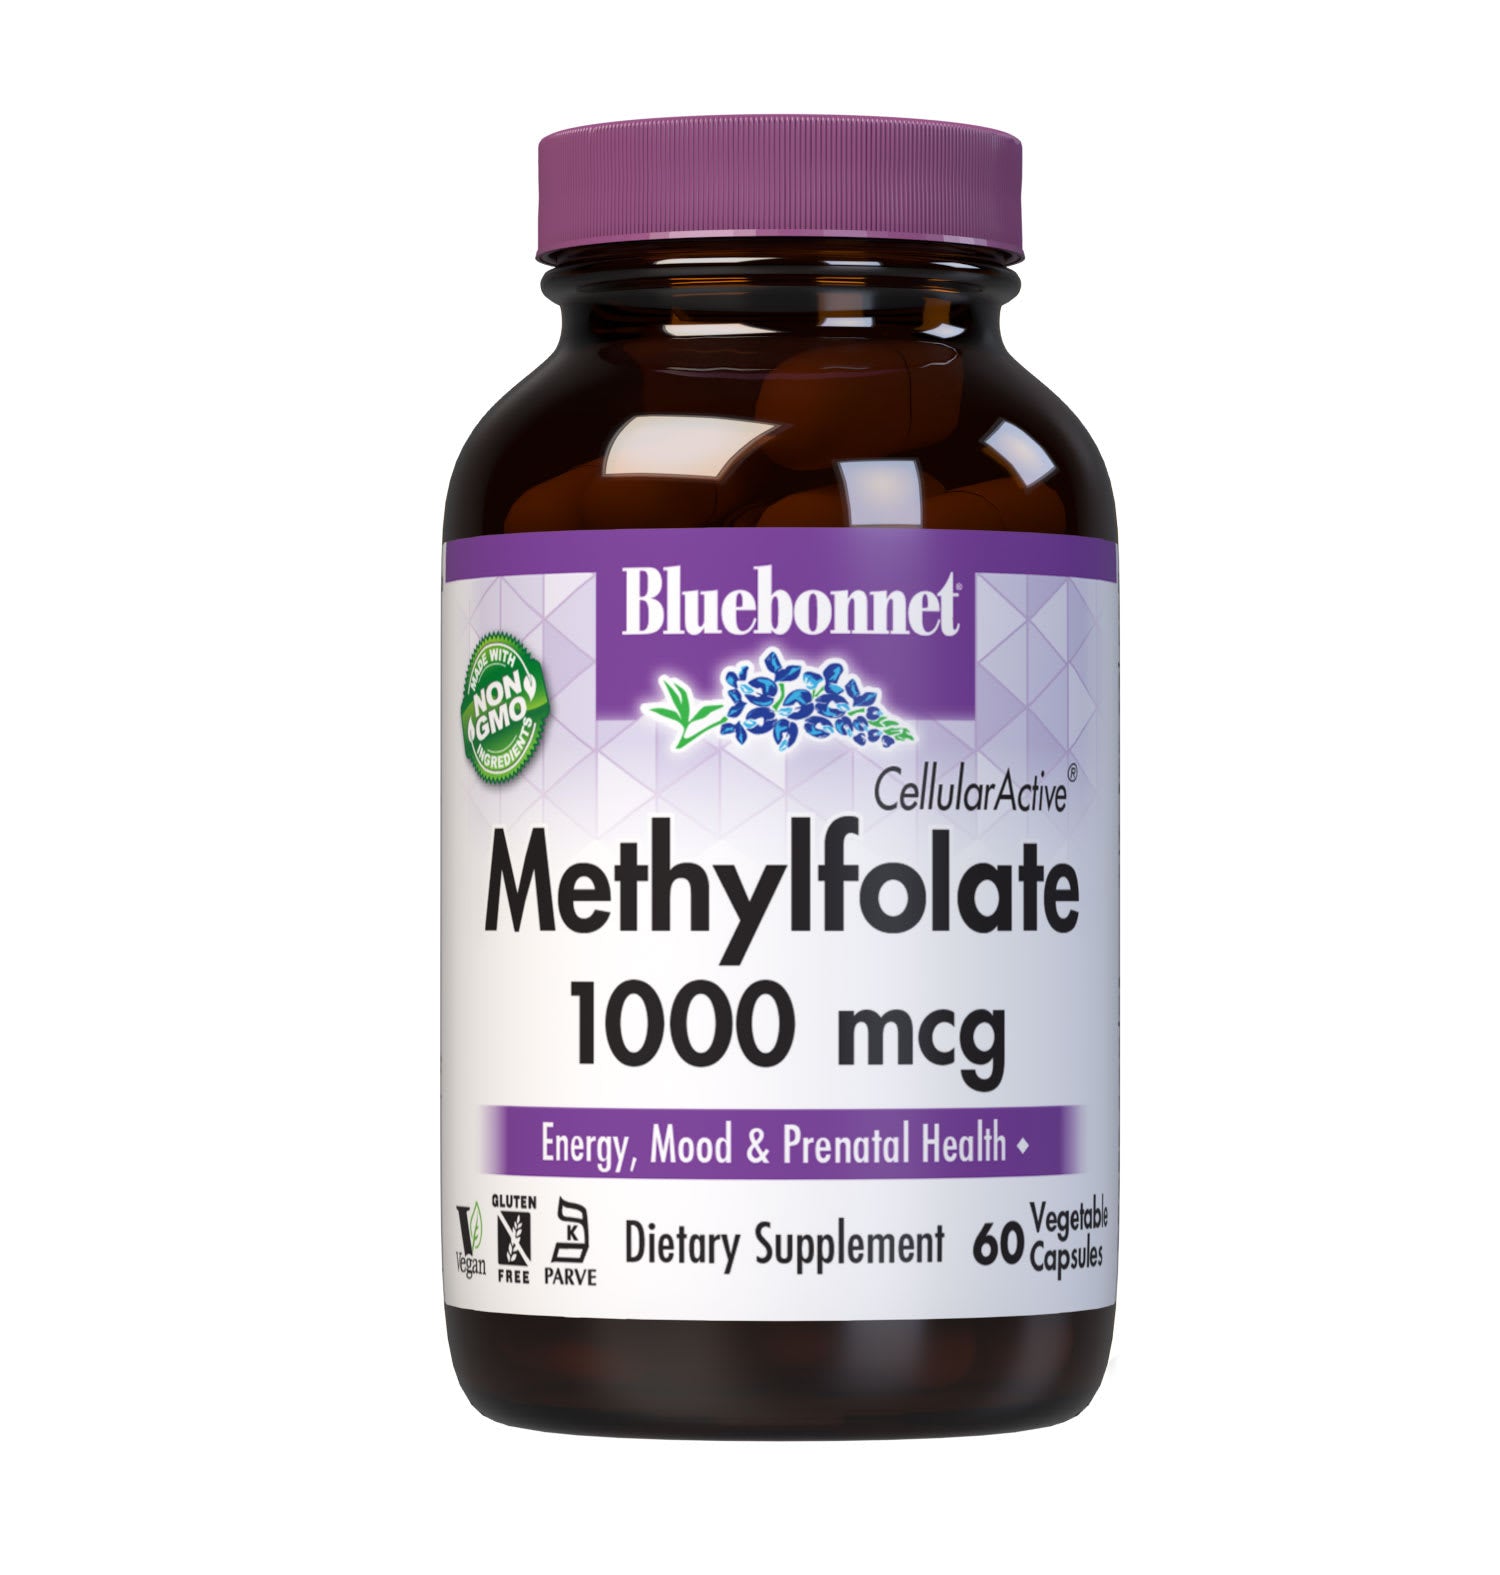 Bluebonnet’s CellularActive Methylfolate 1000 mcg Vegetable Capsules are formulated with Quatrefolic, a patented and clinically studied coenzyme form of folate for prenatal health, energy and vitality, as well as mood support. #size_60 count